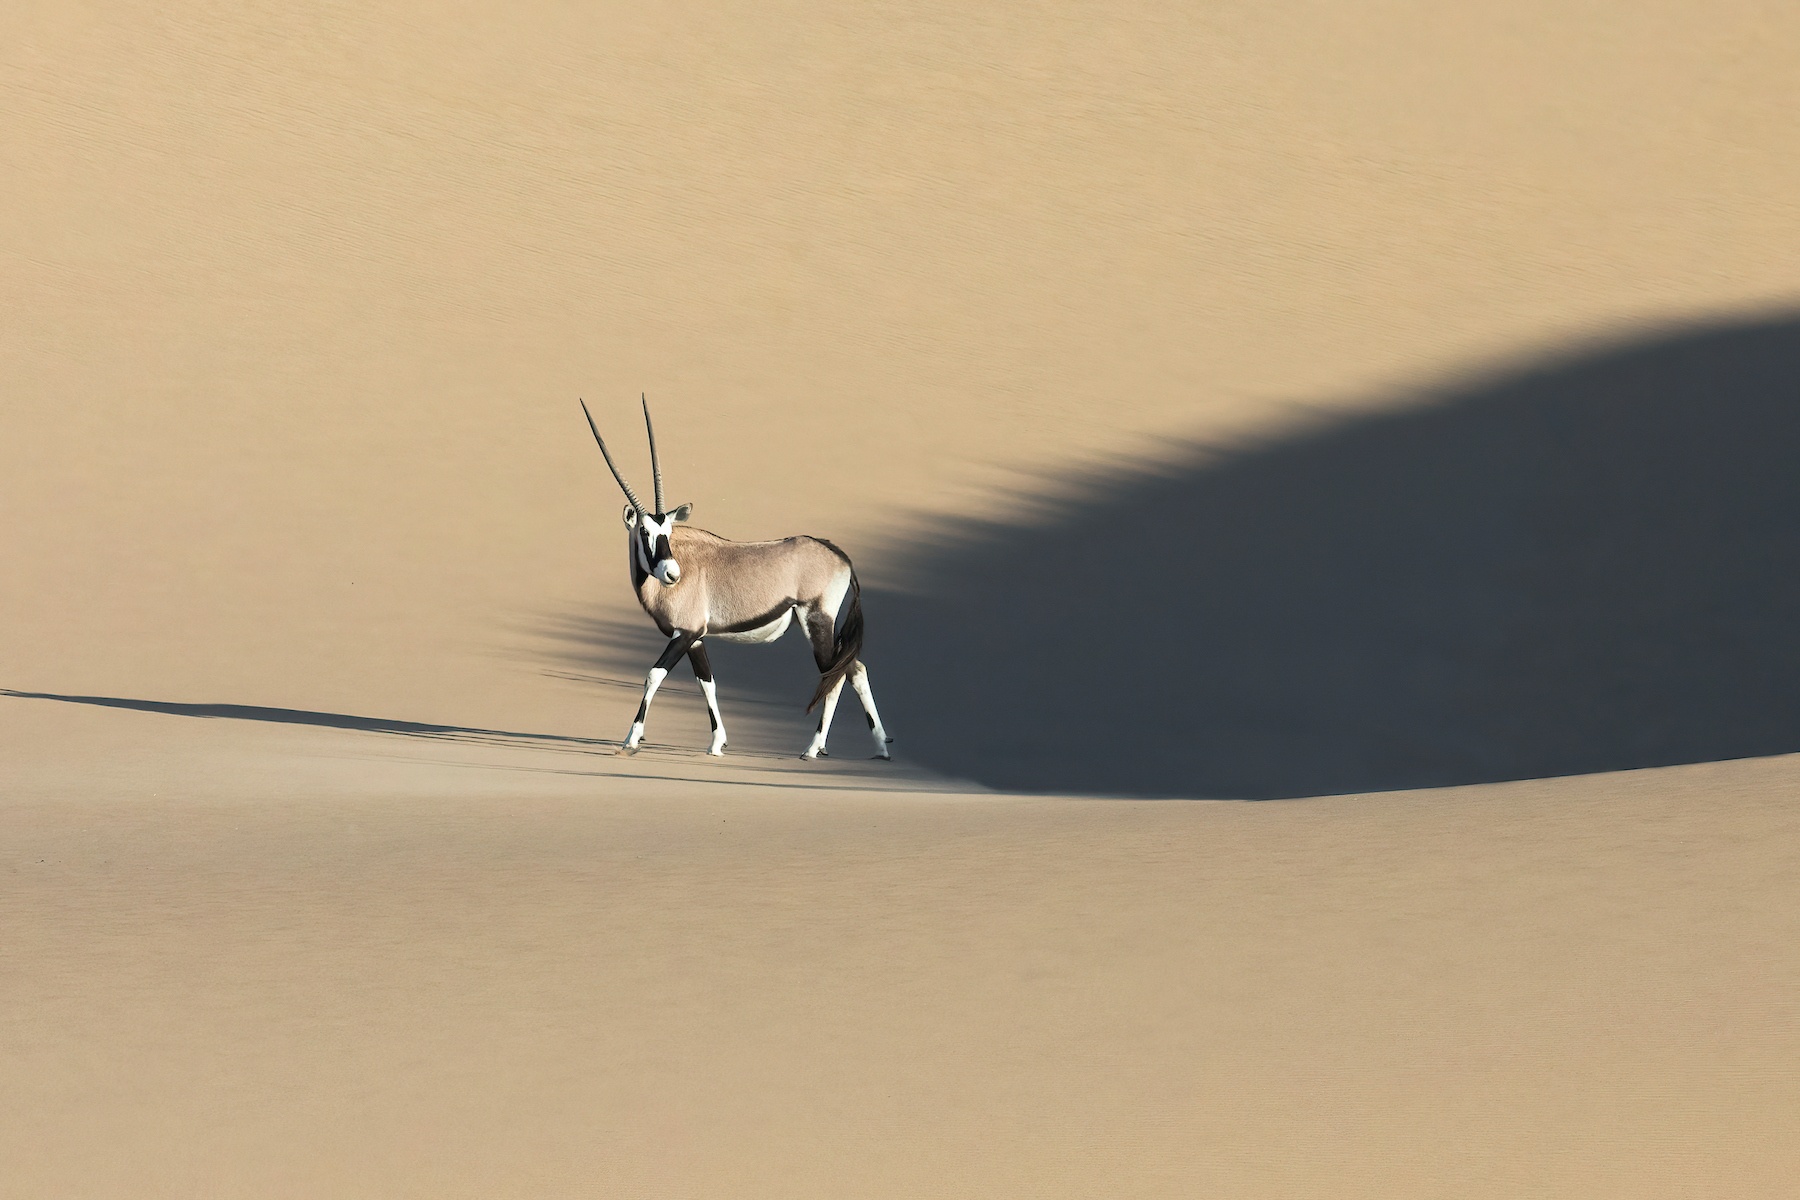 Oryx are truly the ballerinas of Namibia's dunes. They are so graceful and beautiful.